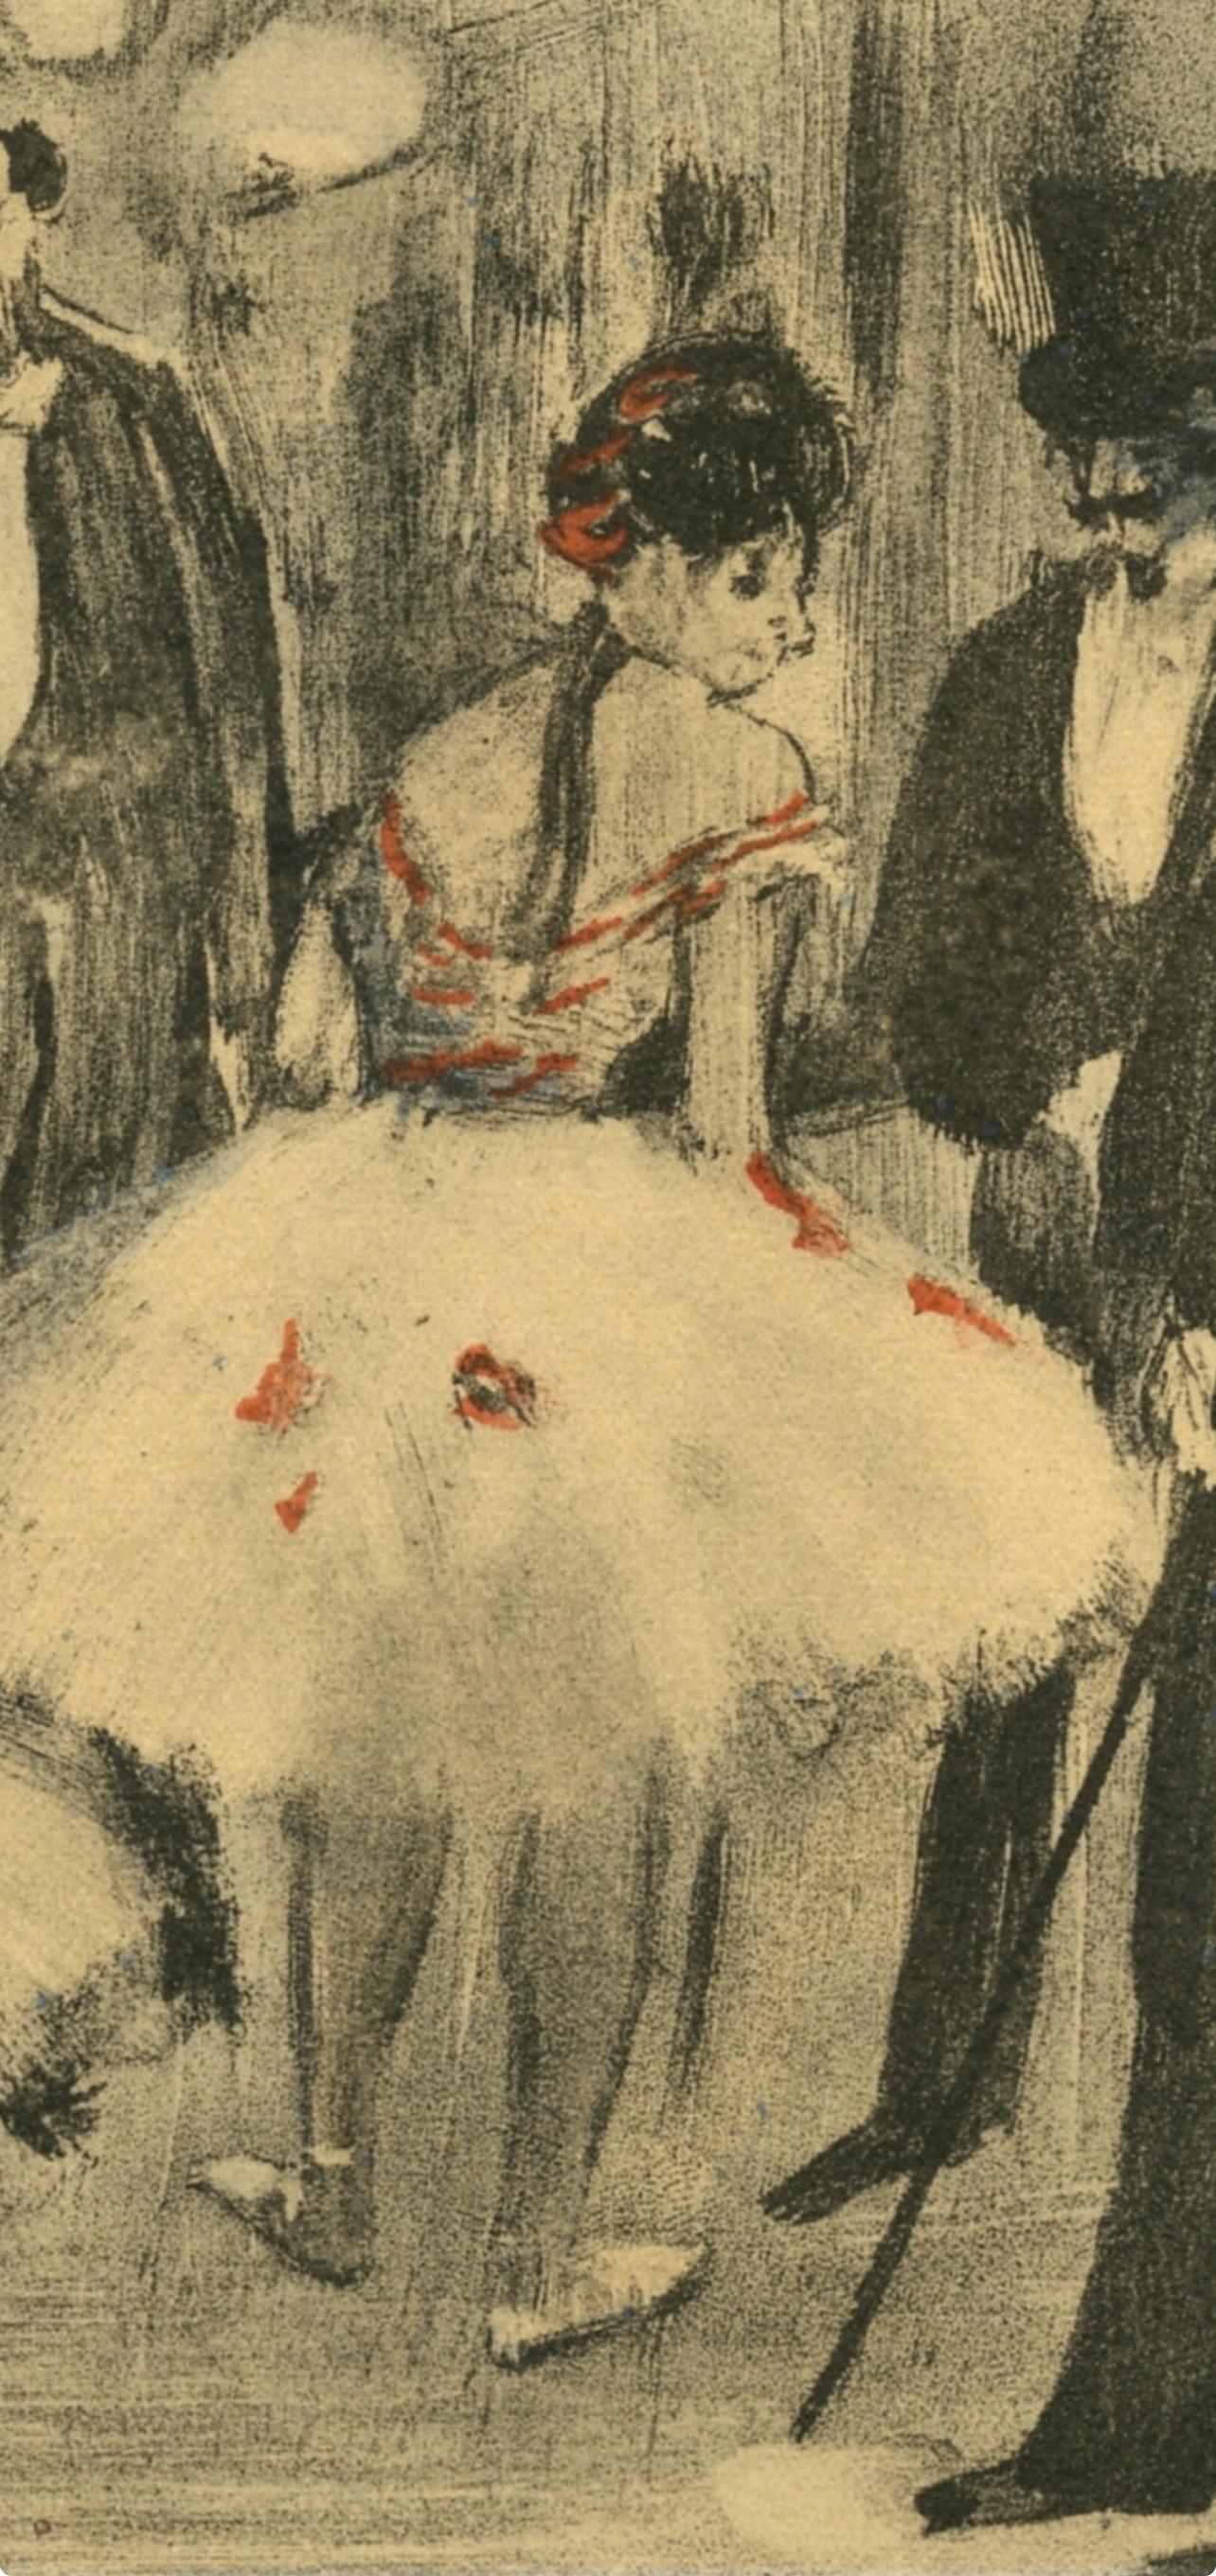 Degas, Famille Cardinal, Les Monotypes (after) - Print by Edgar Degas